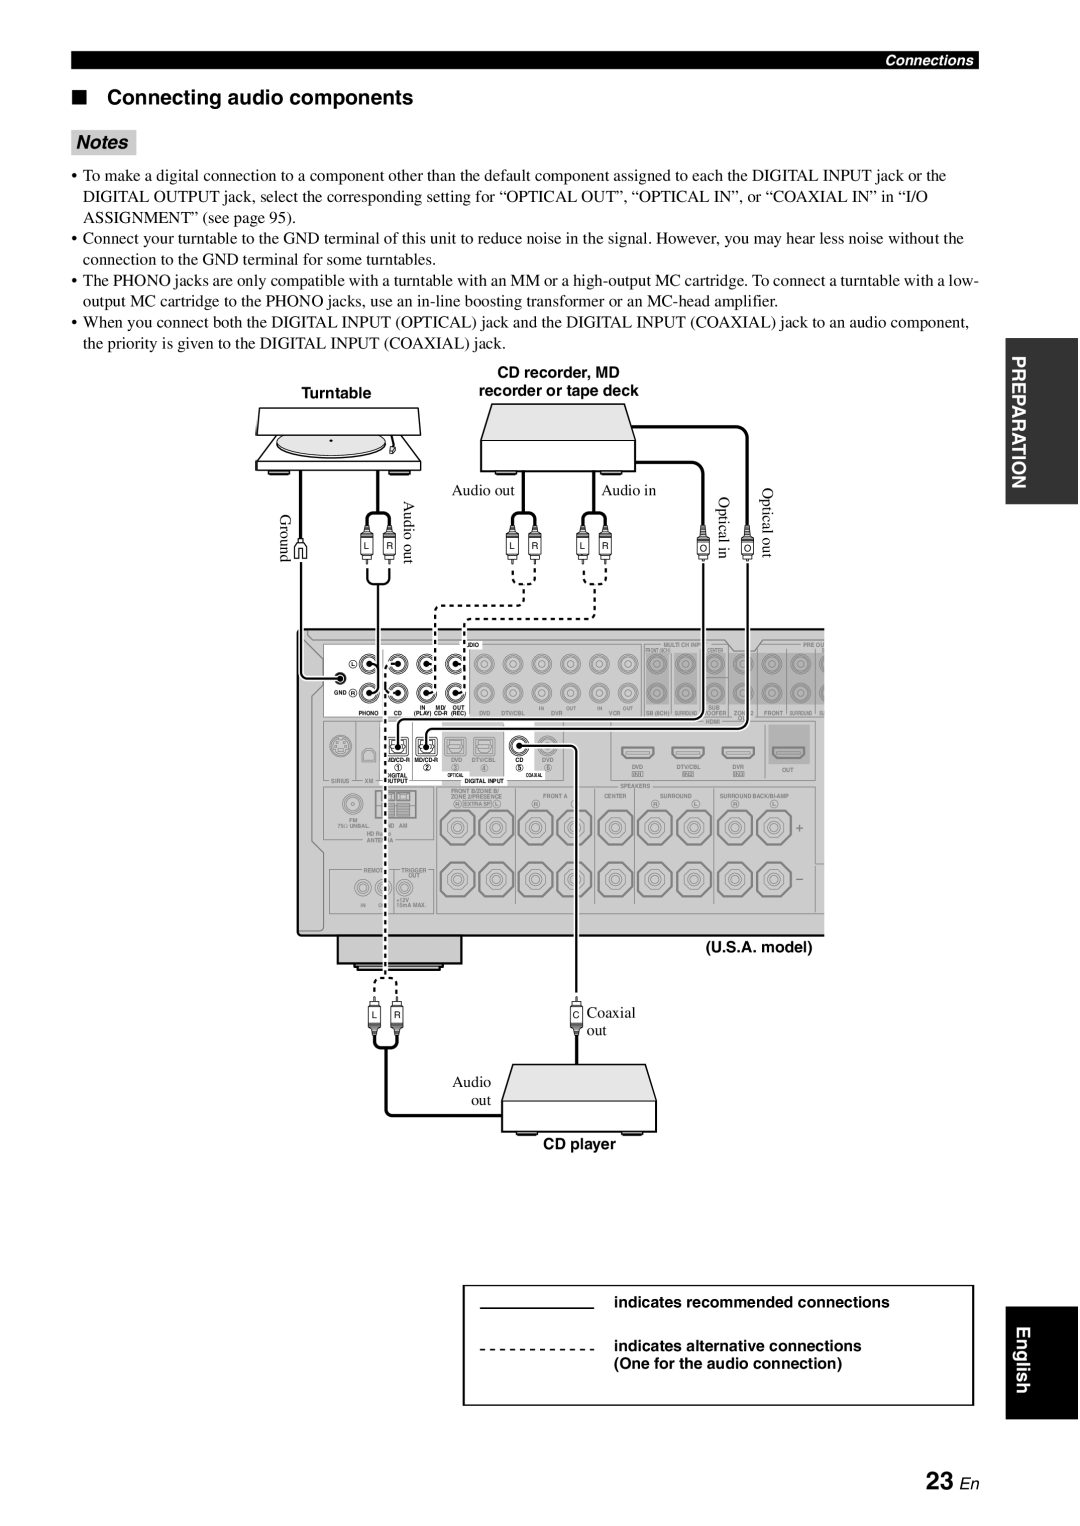 Yamaha HTR-6180 owner manual 23 En, Connecting audio components, Notes 